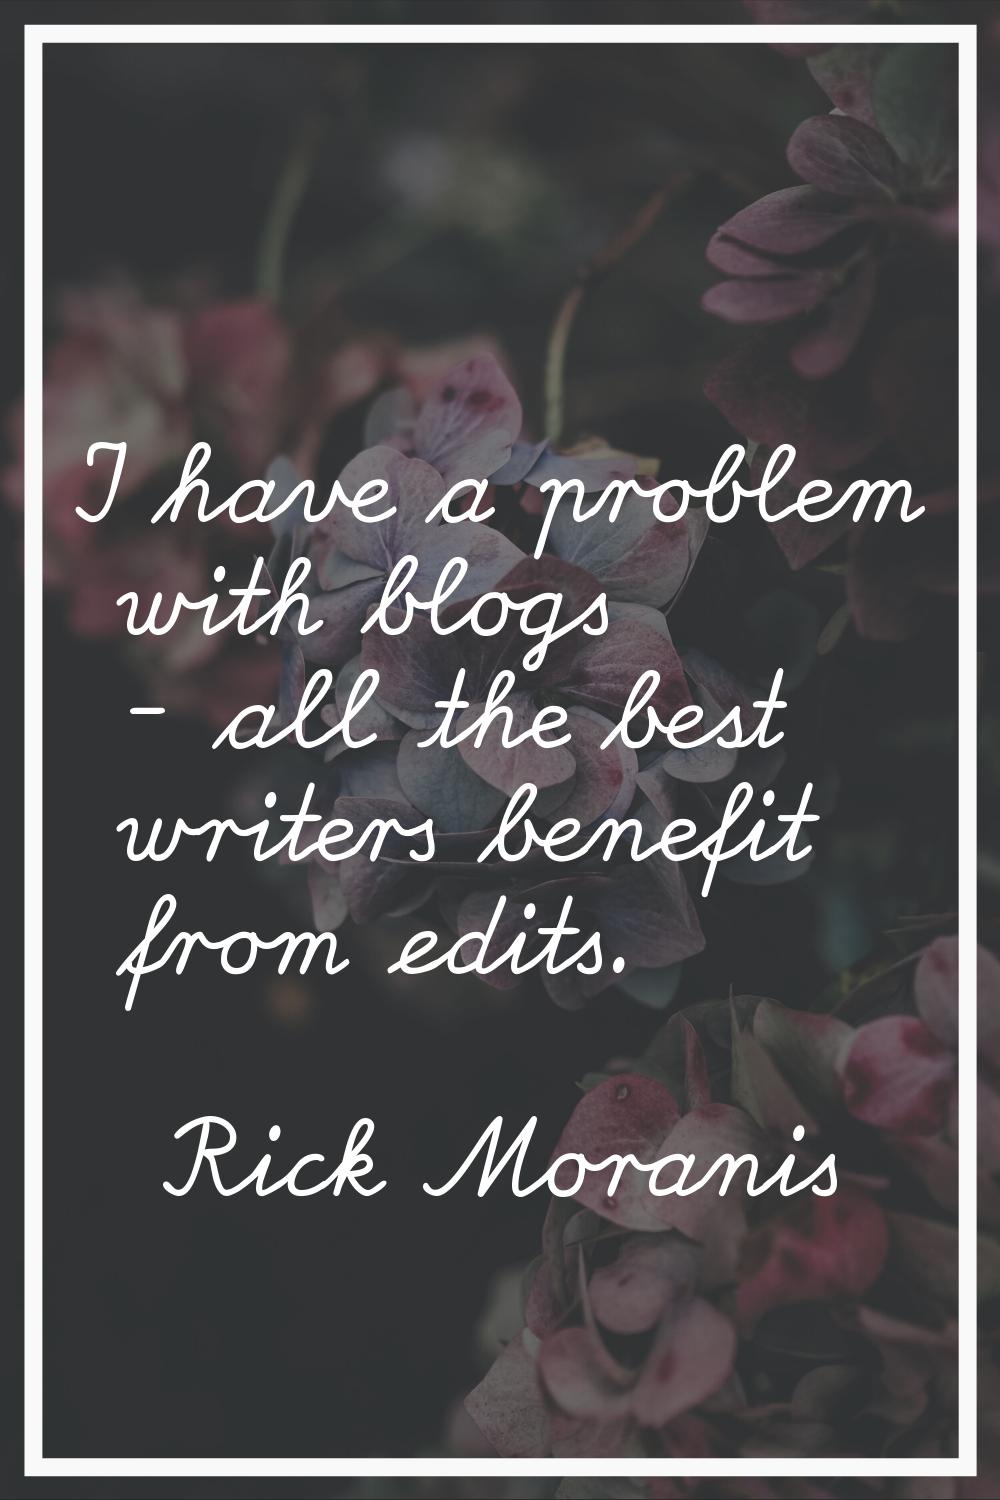 I have a problem with blogs - all the best writers benefit from edits.